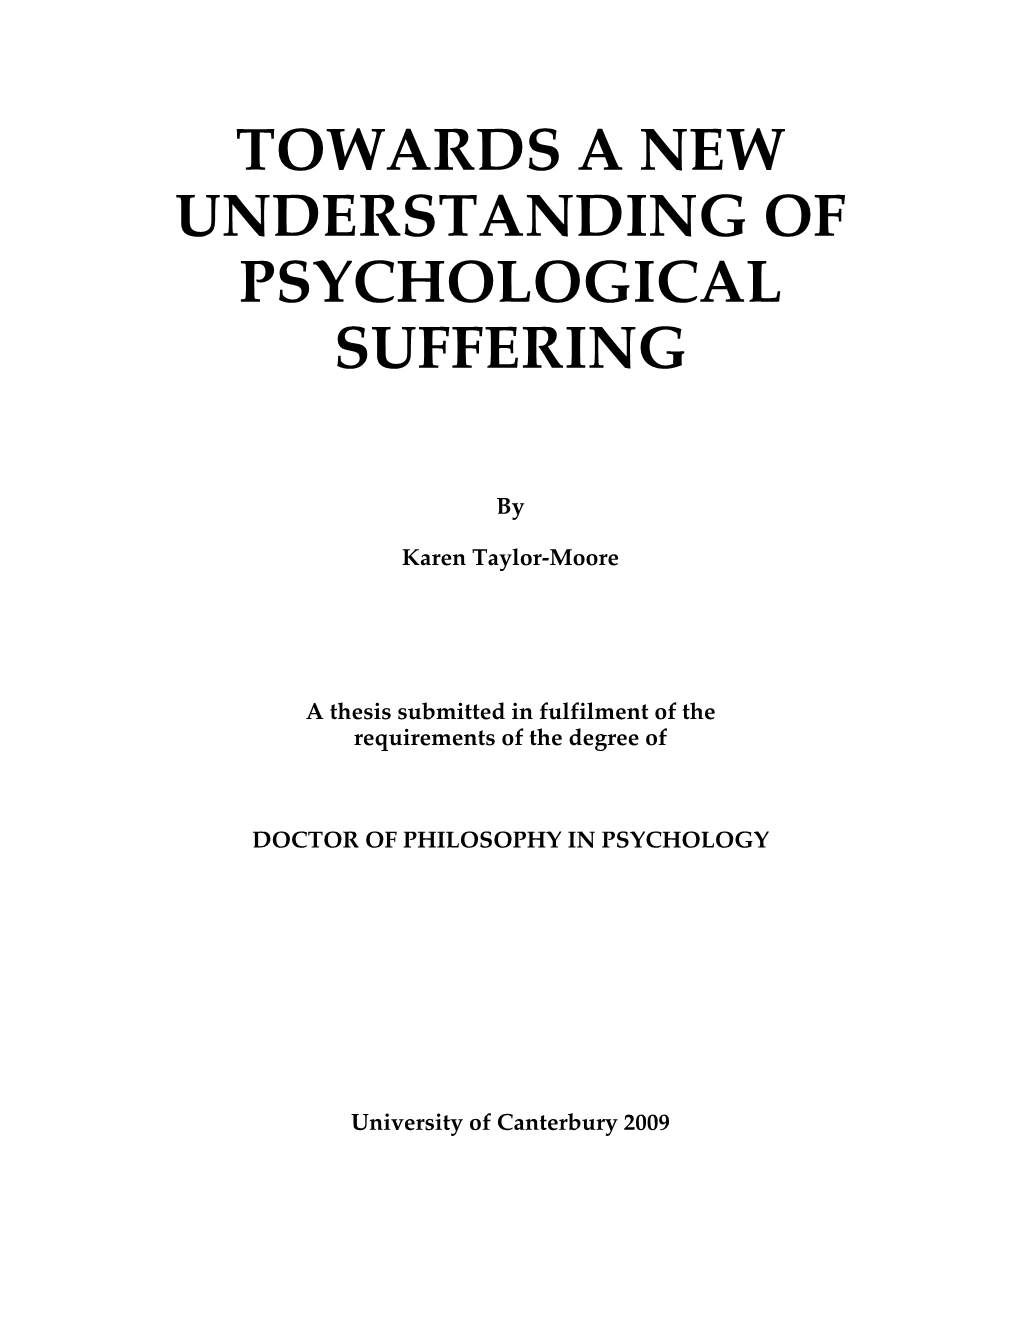 Towards a New Understanding of Psychological Suffering